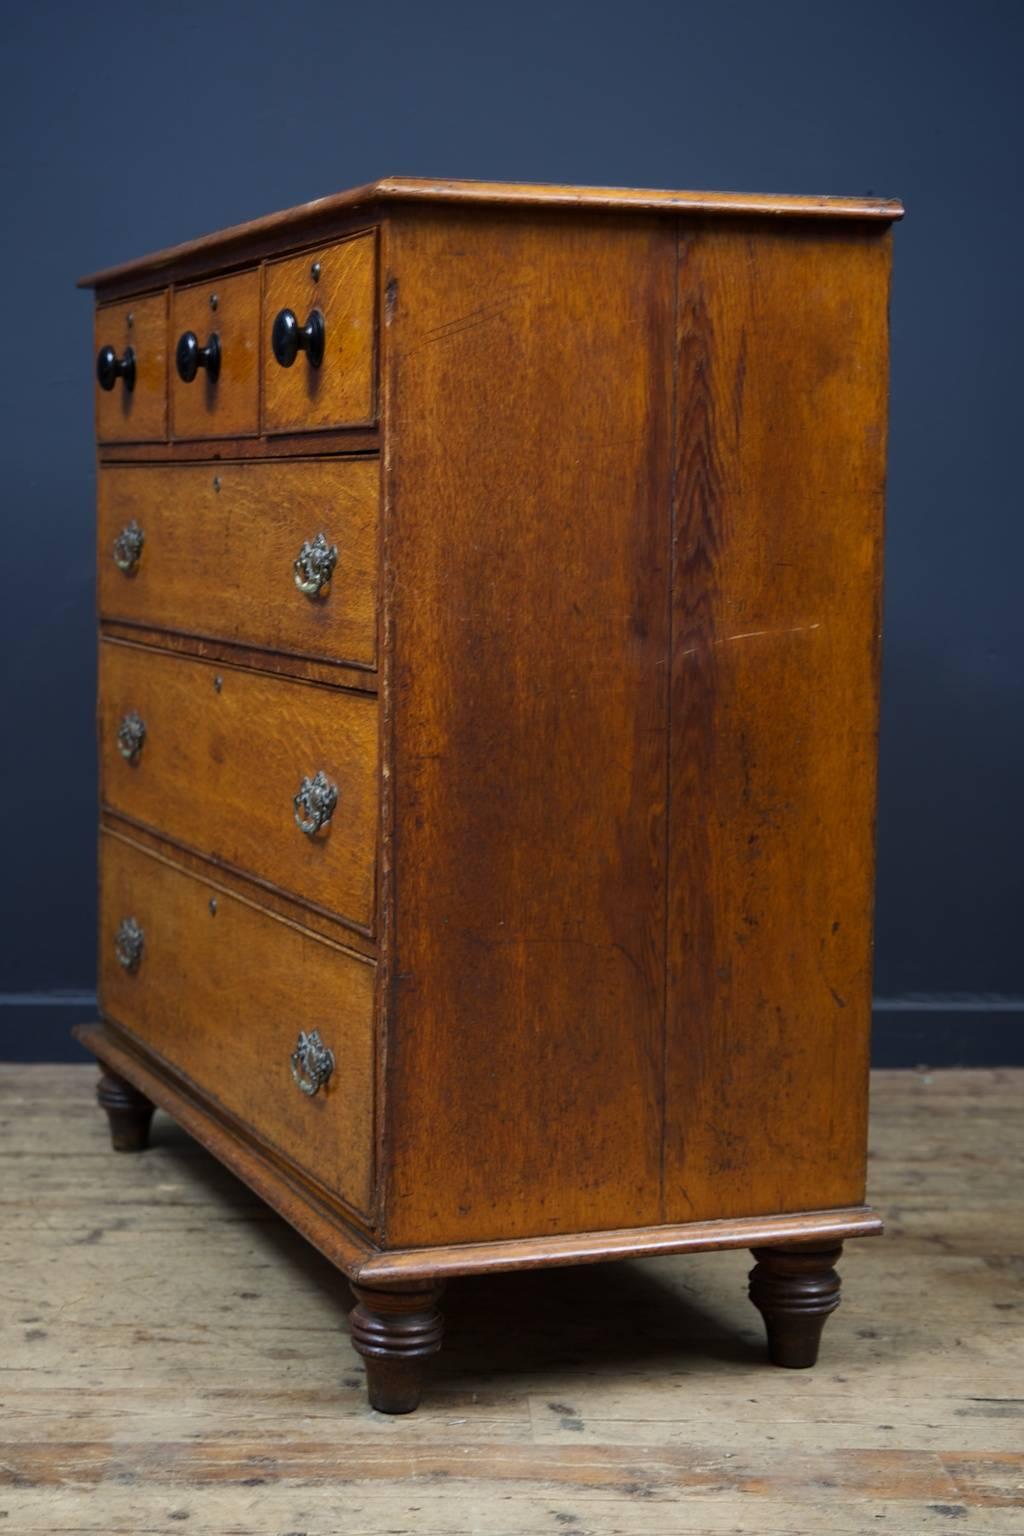 A gentleman's oak chest of drawers.

Extremely original and of excellent proportion, quality and color.

Three single drawers with turned and ebonized handles above three graduated drawers all with there original drop handles, raised on turned